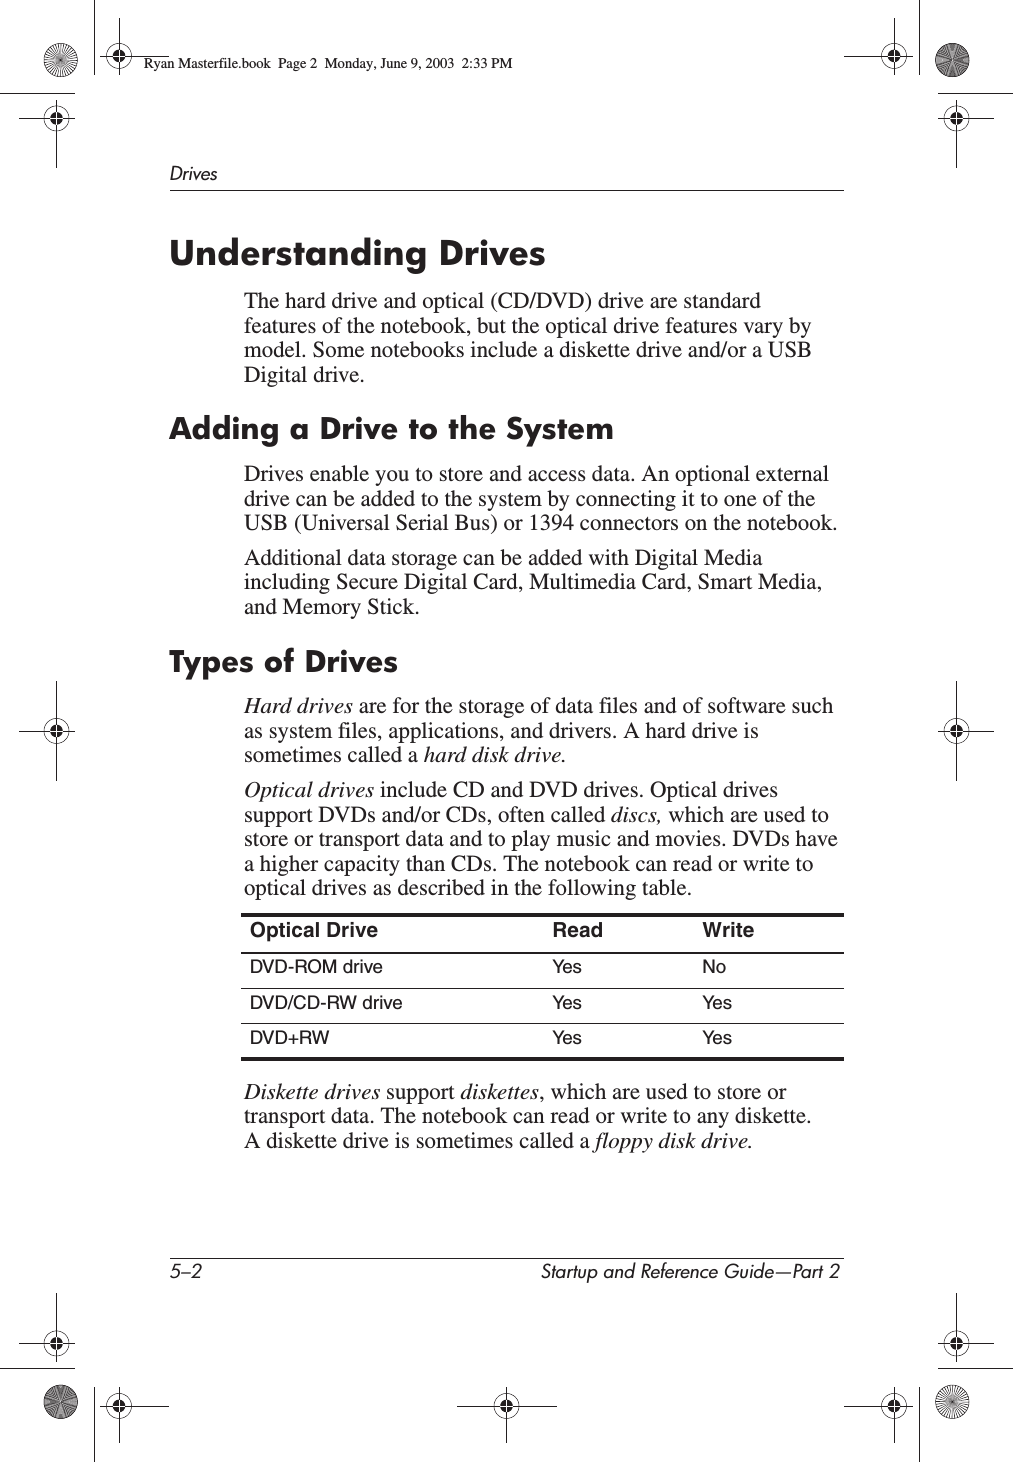 5–2 Startup and Reference Guide—Part 2DrivesUnderstanding DrivesThe hard drive and optical (CD/DVD) drive are standard features of the notebook, but the optical drive features vary by model. Some notebooks include a diskette drive and/or a USB Digital drive.Adding a Drive to the SystemDrives enable you to store and access data. An optional external drive can be added to the system by connecting it to one of the USB (Universal Serial Bus) or 1394 connectors on the notebook.Additional data storage can be added with Digital Media including Secure Digital Card, Multimedia Card, Smart Media, and Memory Stick.Types of DrivesHard drives are for the storage of data files and of software such as system files, applications, and drivers. A hard drive is sometimes called a hard disk drive.Optical drives include CD and DVD drives. Optical drives support DVDs and/or CDs, often called discs, which are used to store or transport data and to play music and movies. DVDs have a higher capacity than CDs. The notebook can read or write to optical drives as described in the following table.Diskette drives support diskettes, which are used to store or transport data. The notebook can read or write to any diskette. A diskette drive is sometimes called a floppy disk drive.Optical Drive Read WriteDVD-ROM drive Yes No DVD/CD-RW drive Yes YesDVD+RW Yes YesRyan Masterfile.book  Page 2  Monday, June 9, 2003  2:33 PM